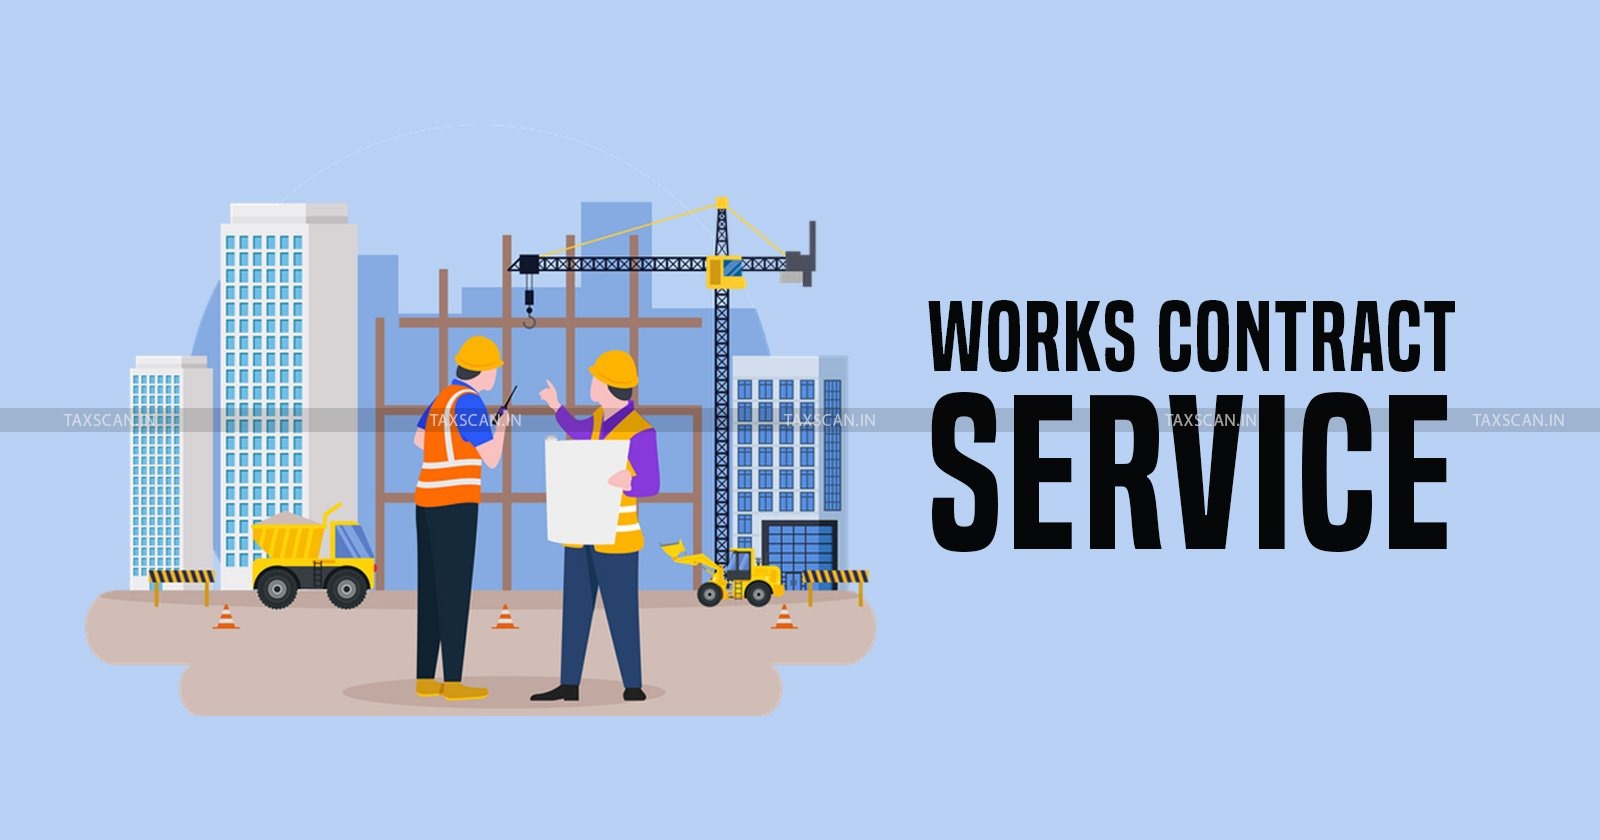 Work Contract Service - CESTAT Allahabad - Tax news - Service Tax Demand under Work Contract Service - Taxscan